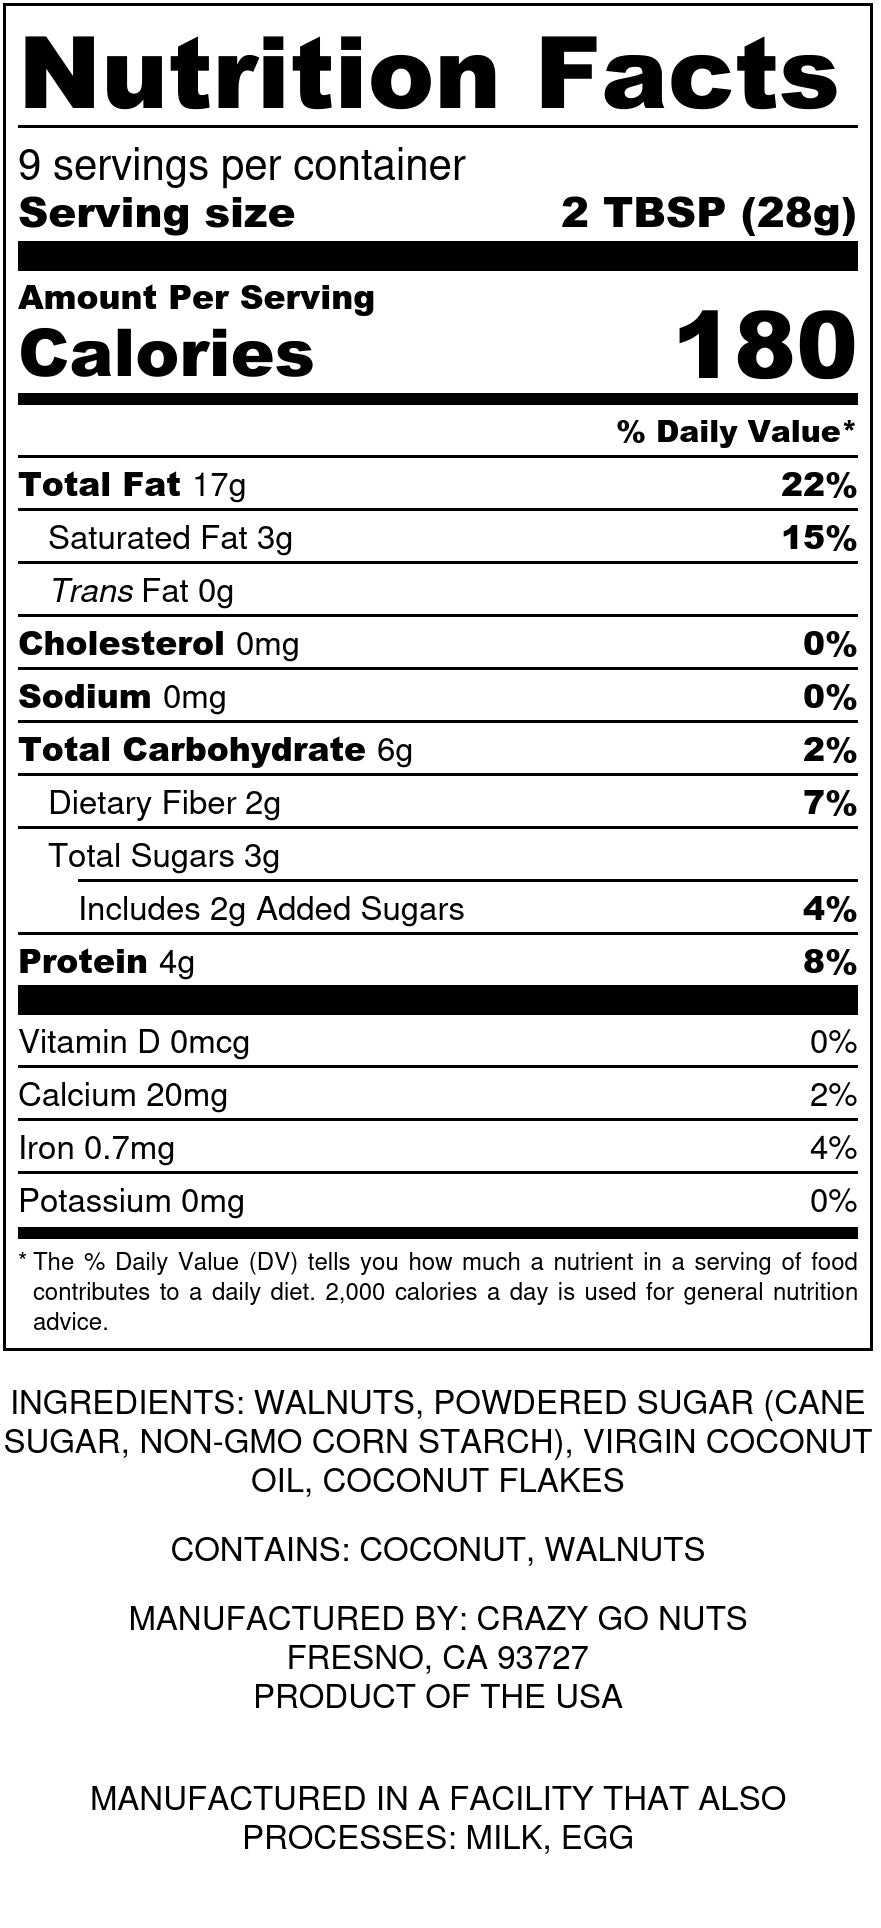 Nutrition panel for coconut walnut butter